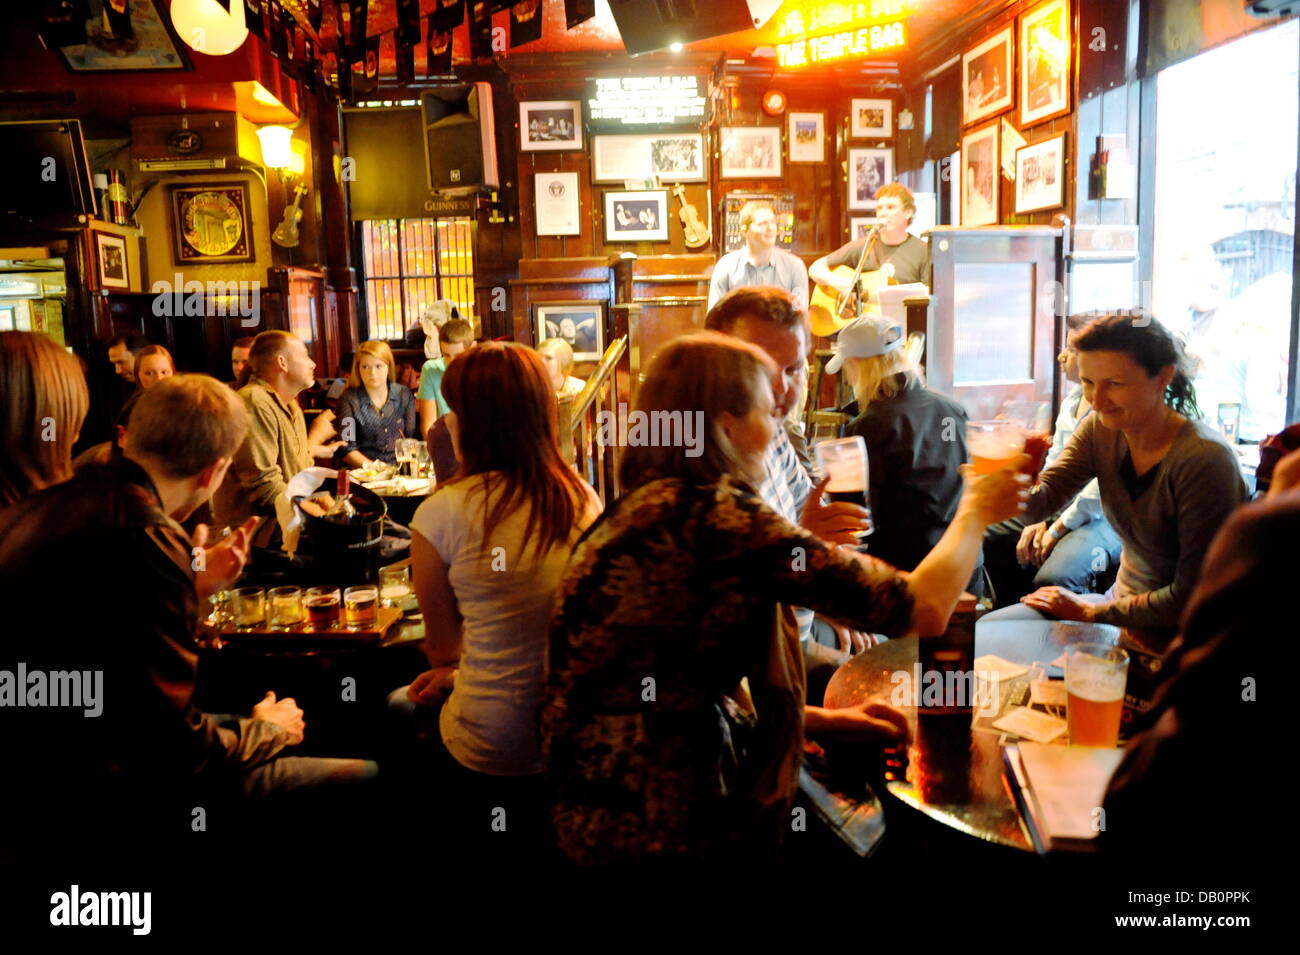 Visitors of the Temple Bar-Quarter in Dublin take a beer in iinside the pub 'Temple Bar, on June 26, 2013. Musicians entertain the guests with irish Folk Music. Stock Photo